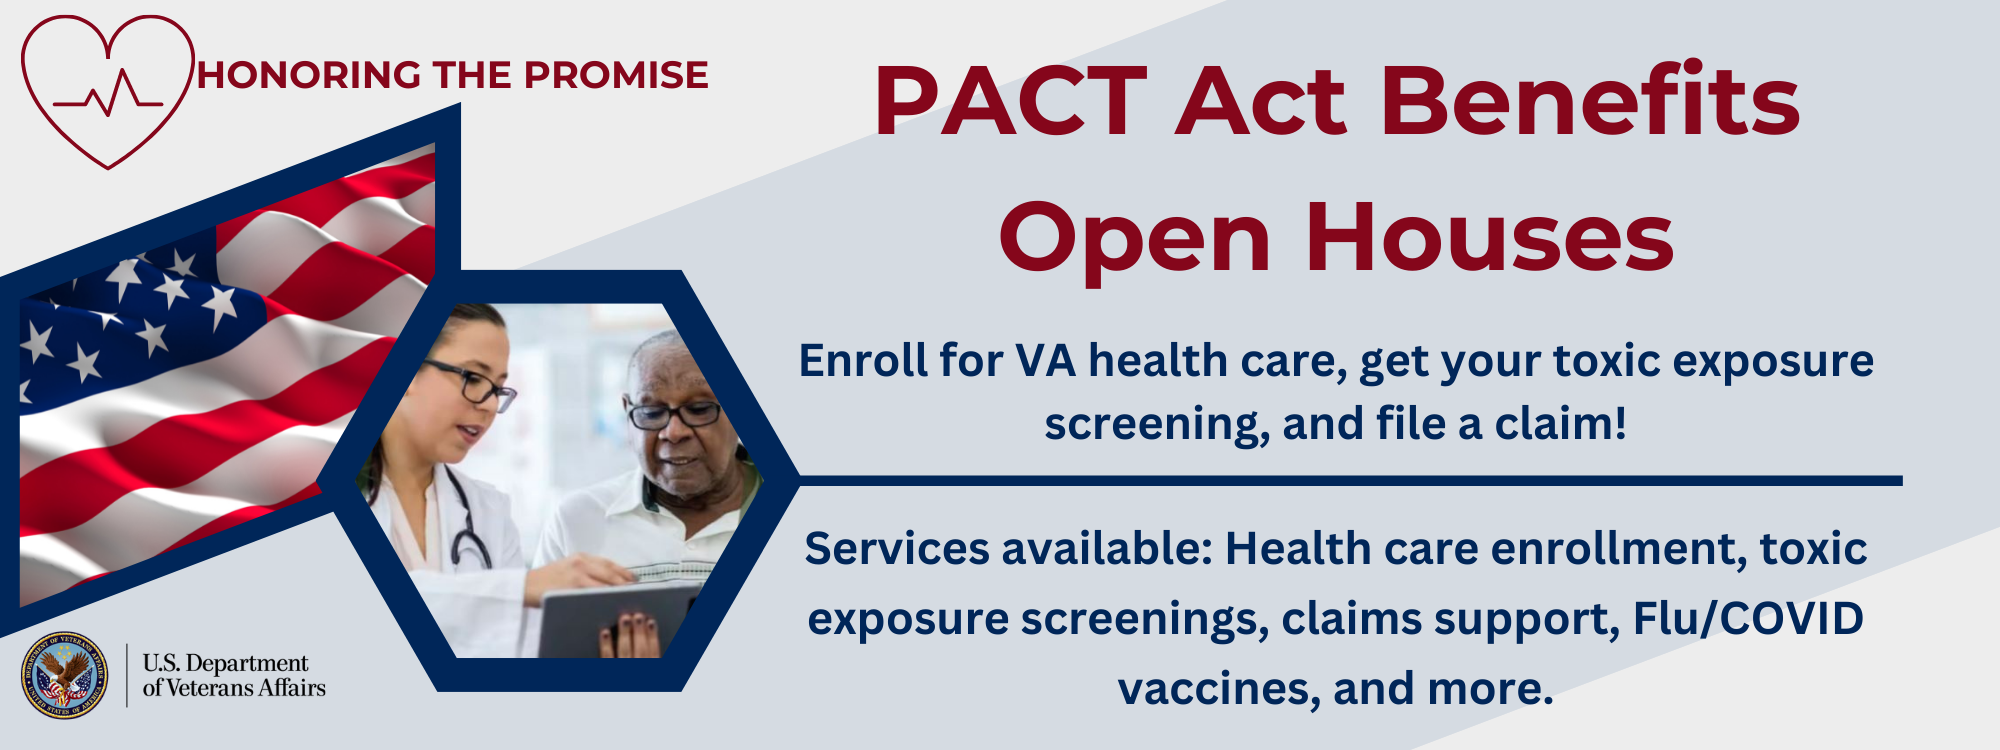 A banner graphic with text promoting PACT Act open houses scheduled VA facilities in December 2022.